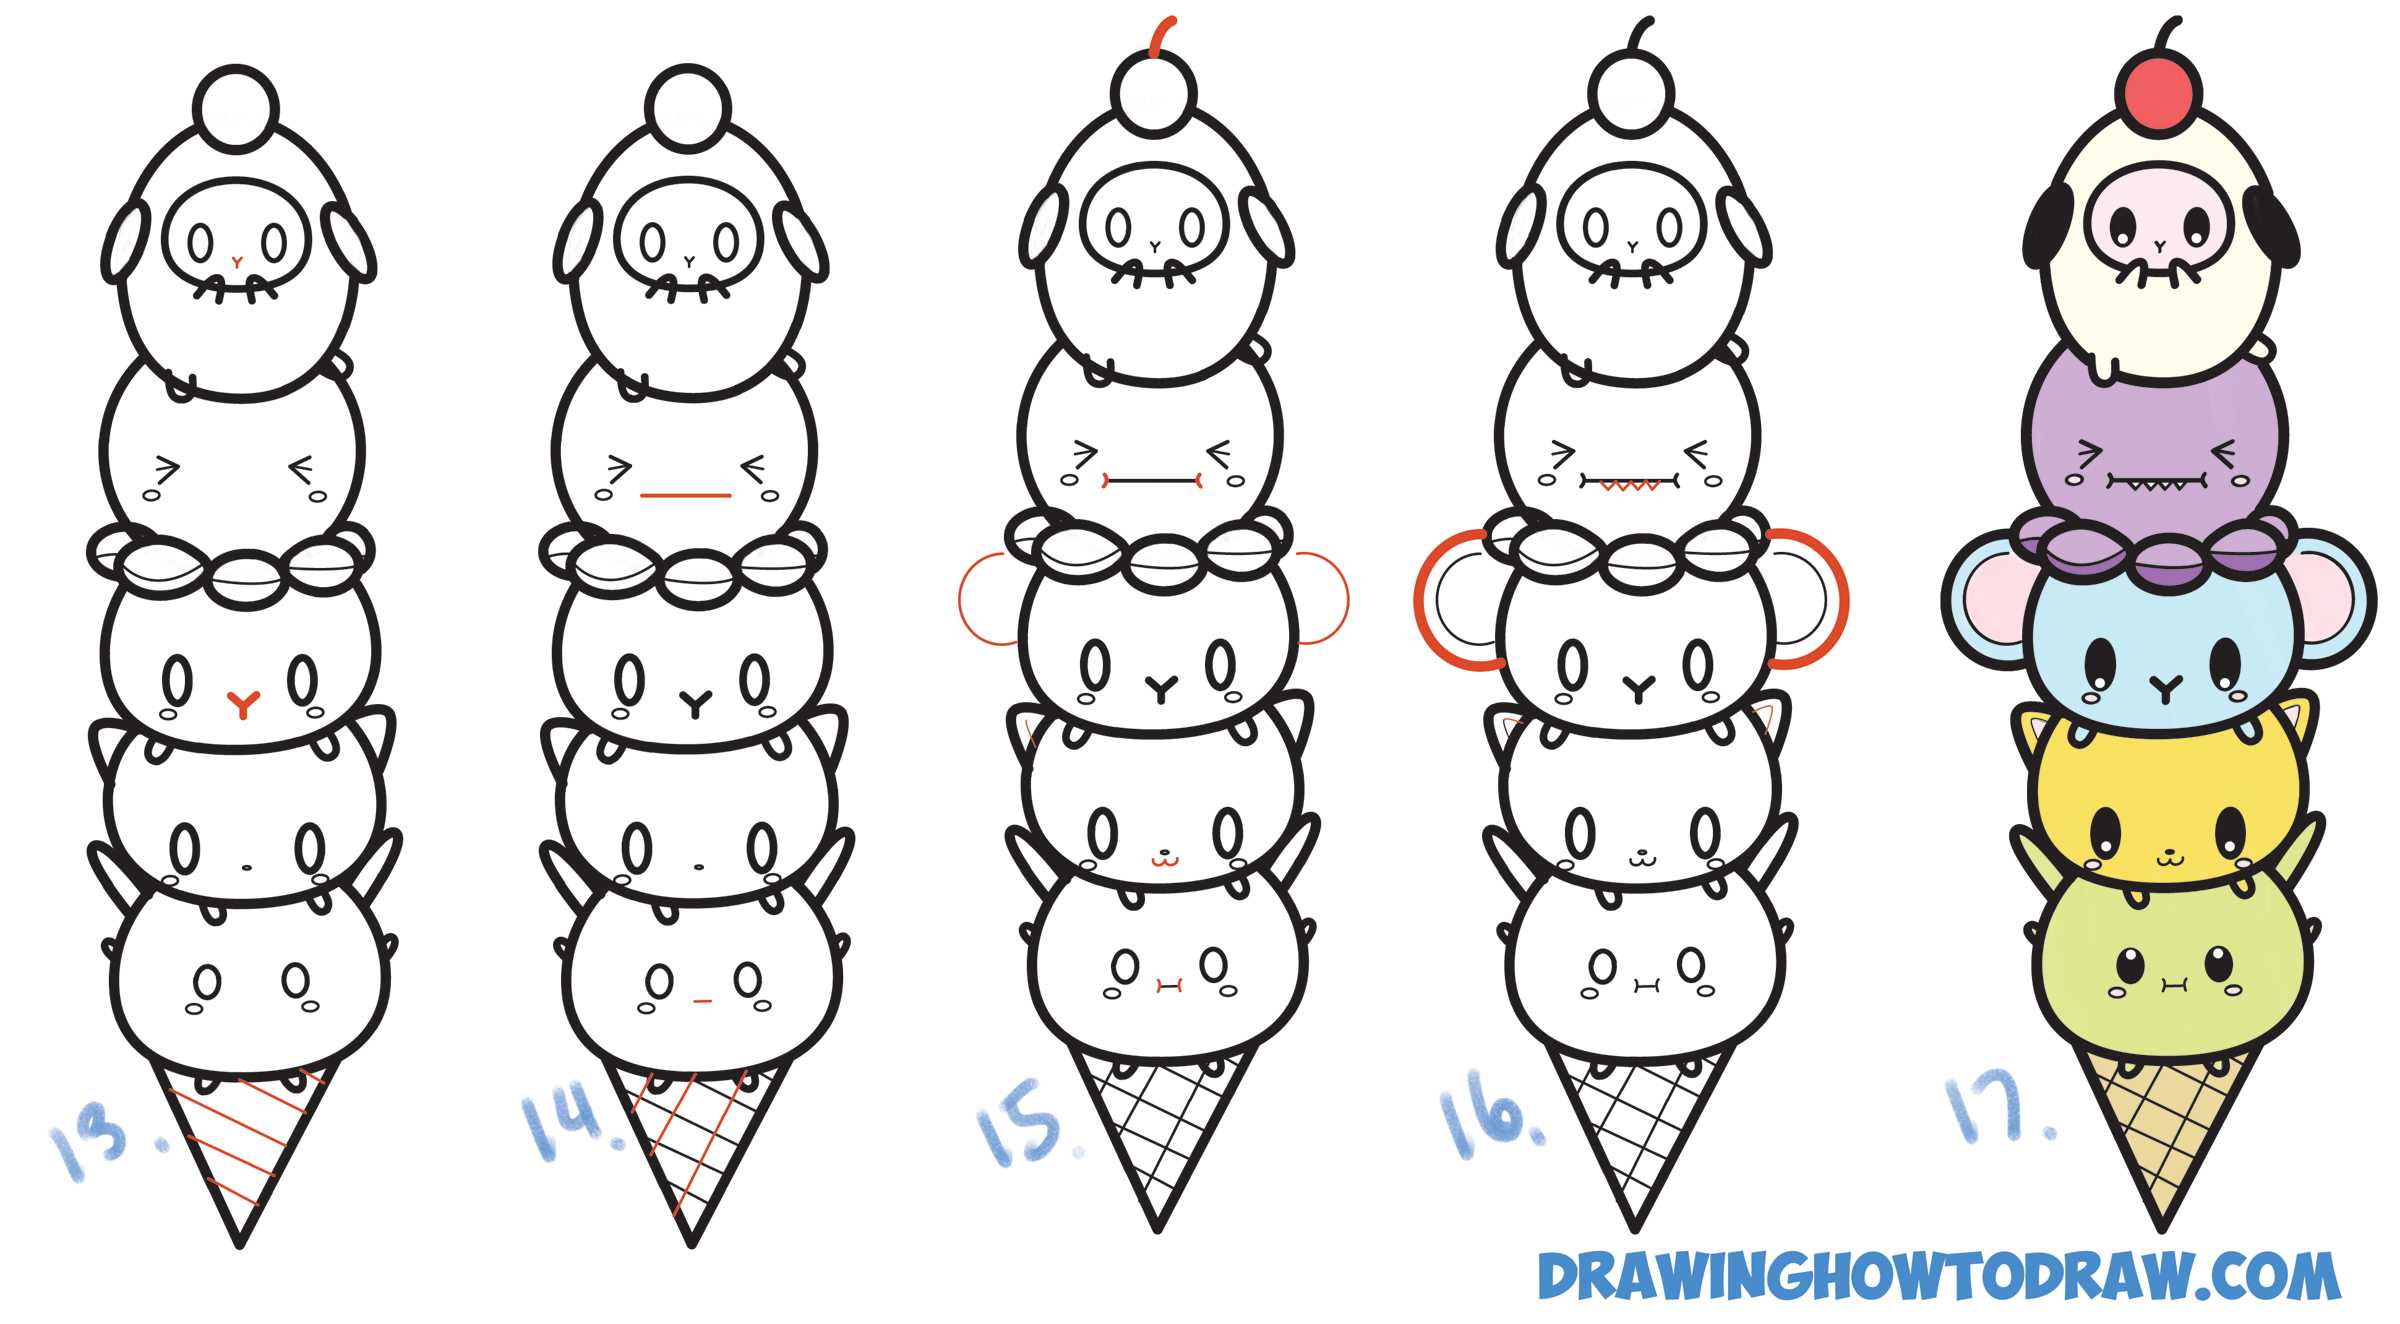 How To Draw Cute Kawaii Animals Step By Step - In this step by step